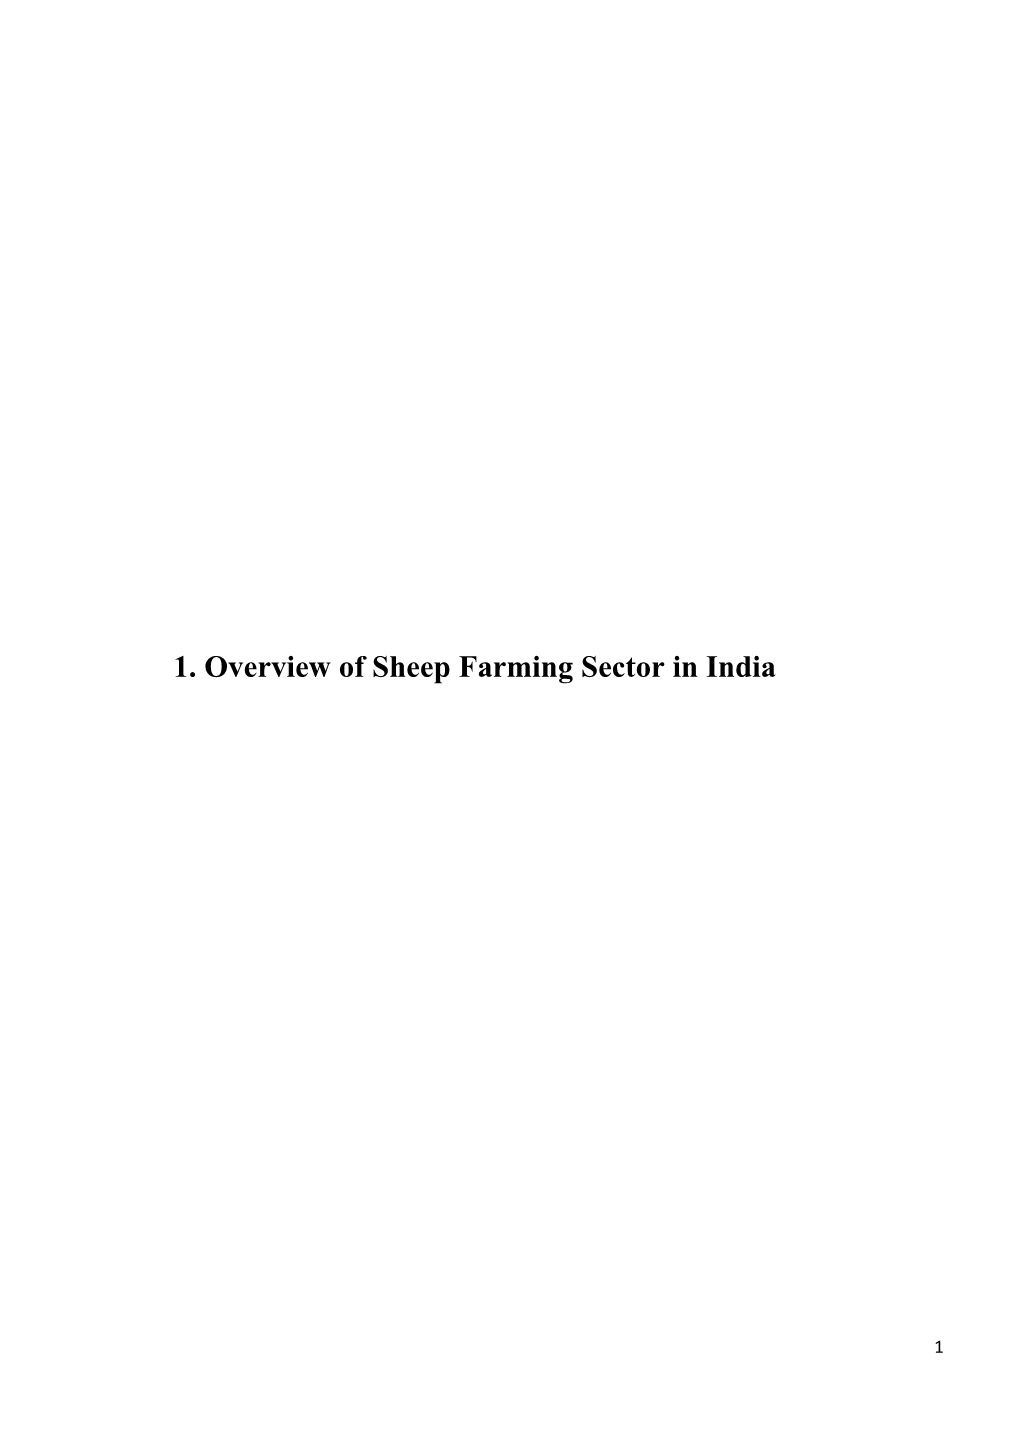 1. Overview of Sheep Farming Sector in India